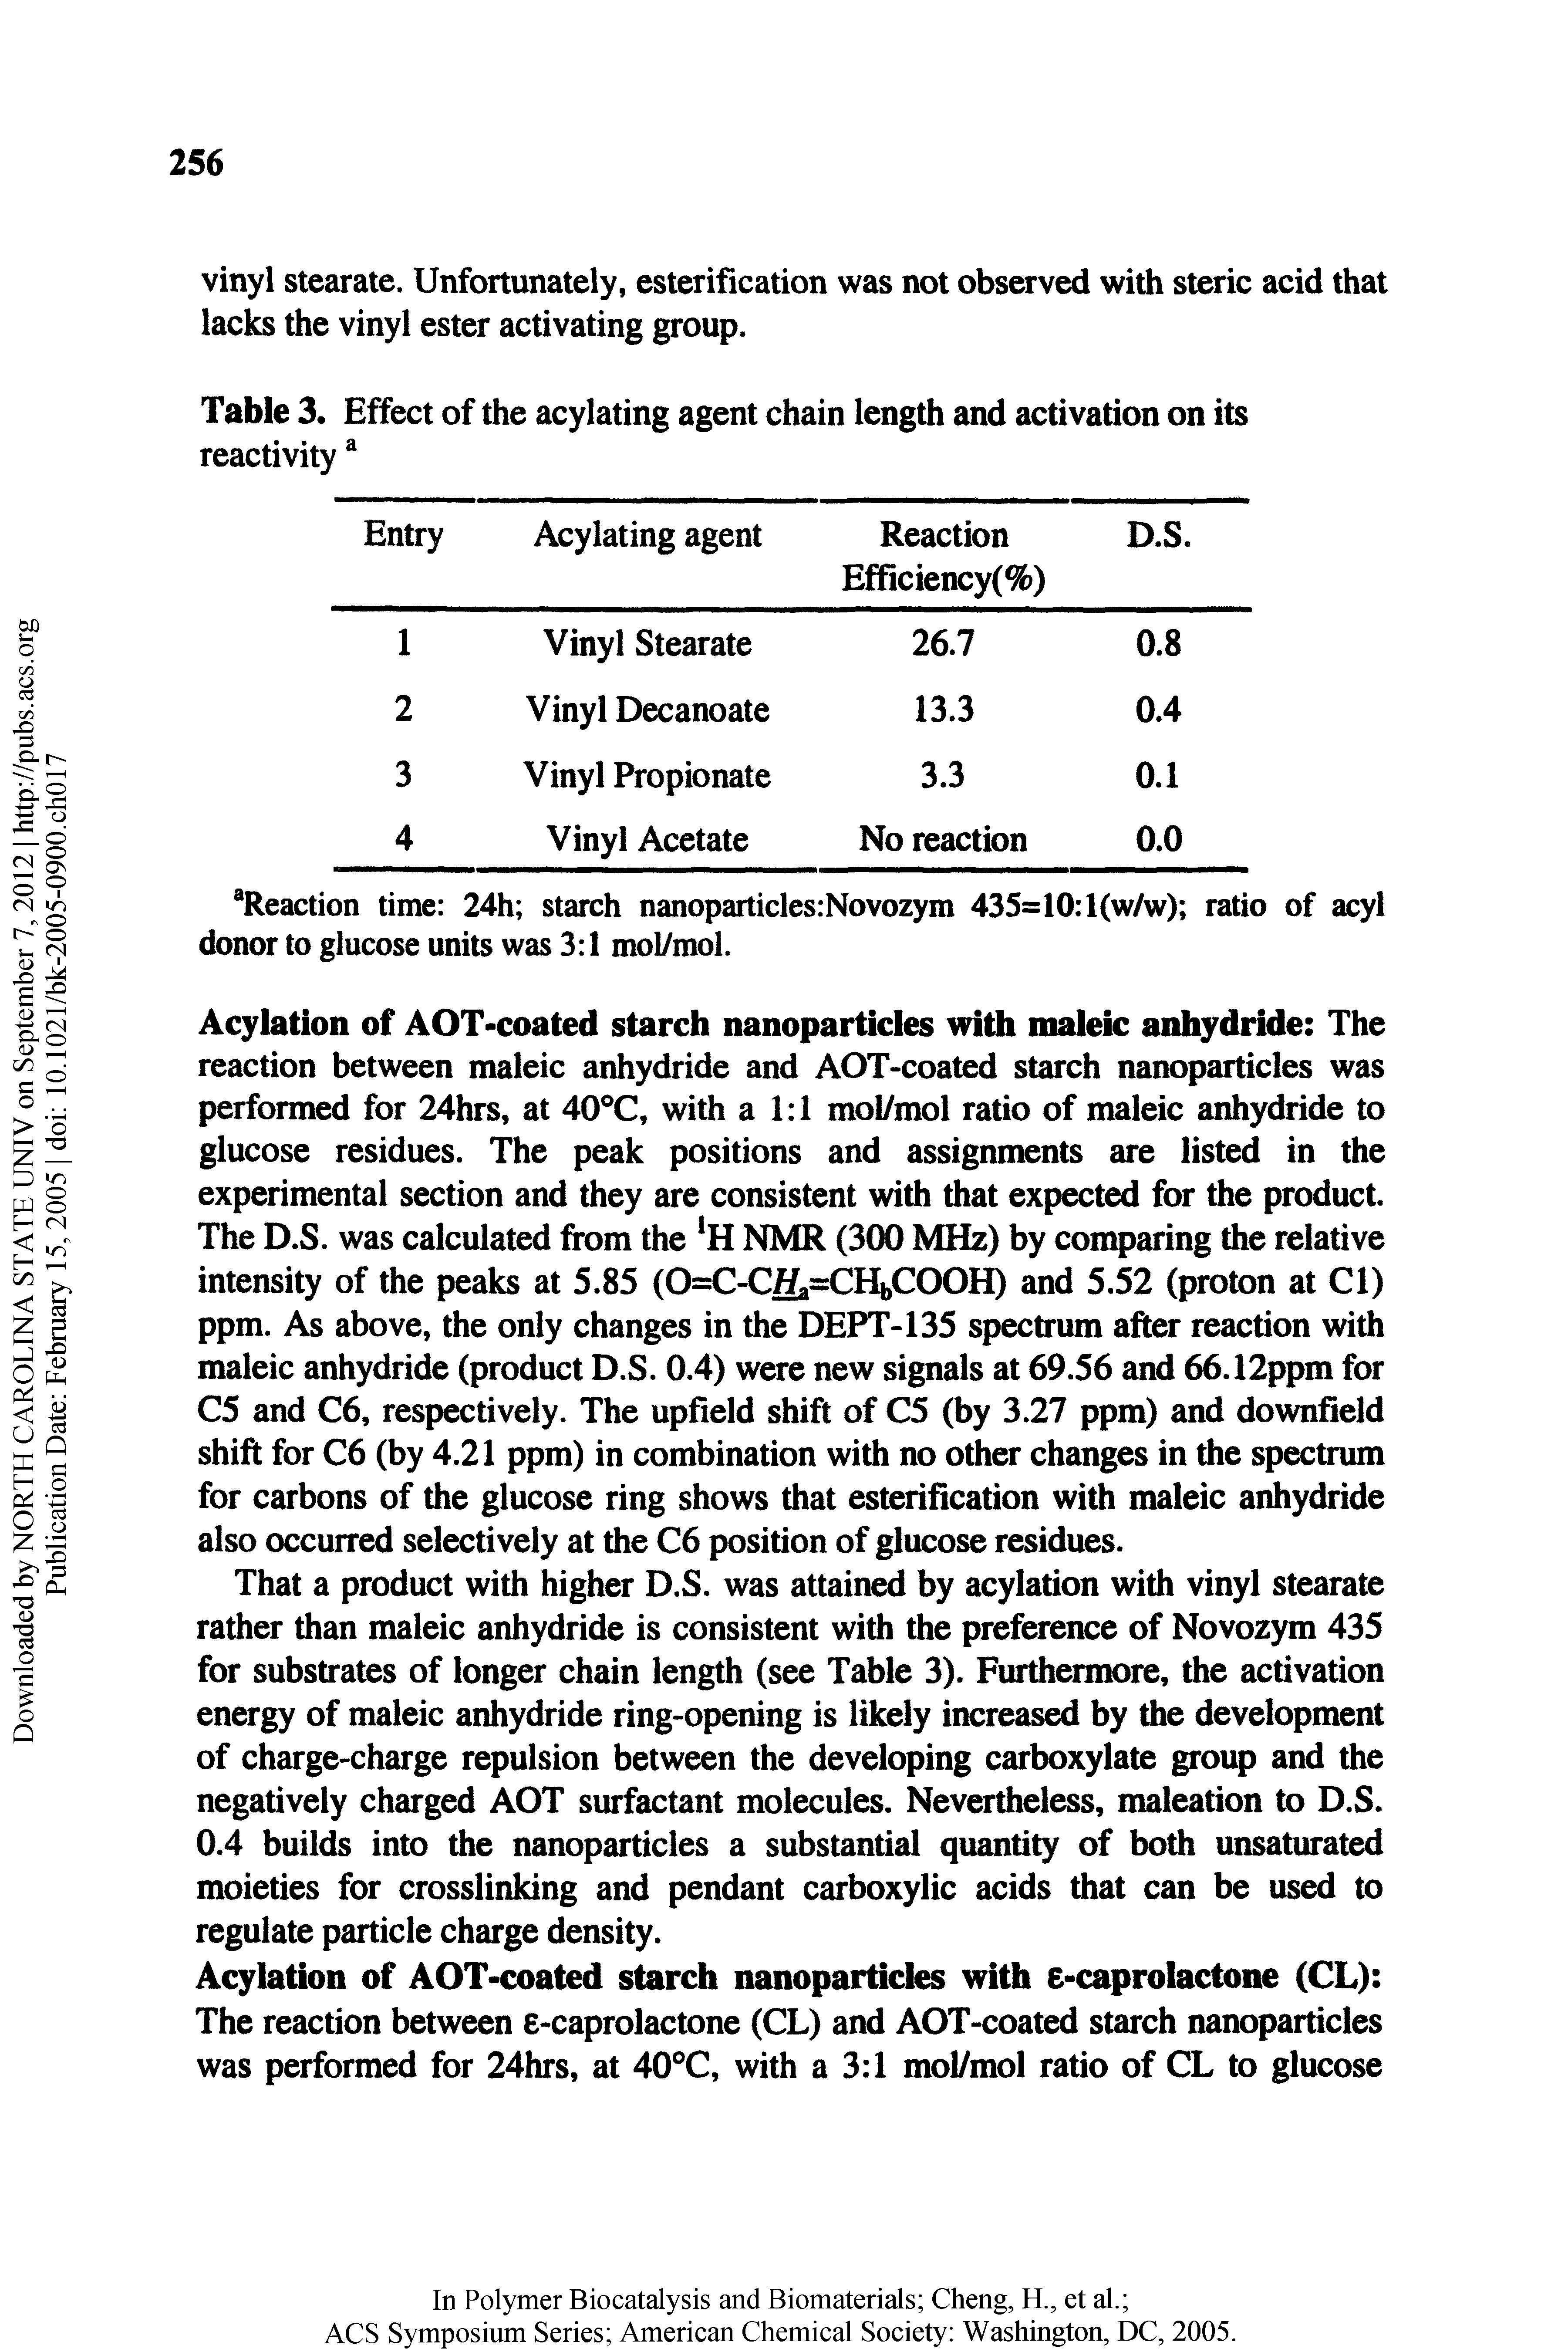 Table 3. Effect of the acylating agent chain length and activation on its reactivity ...